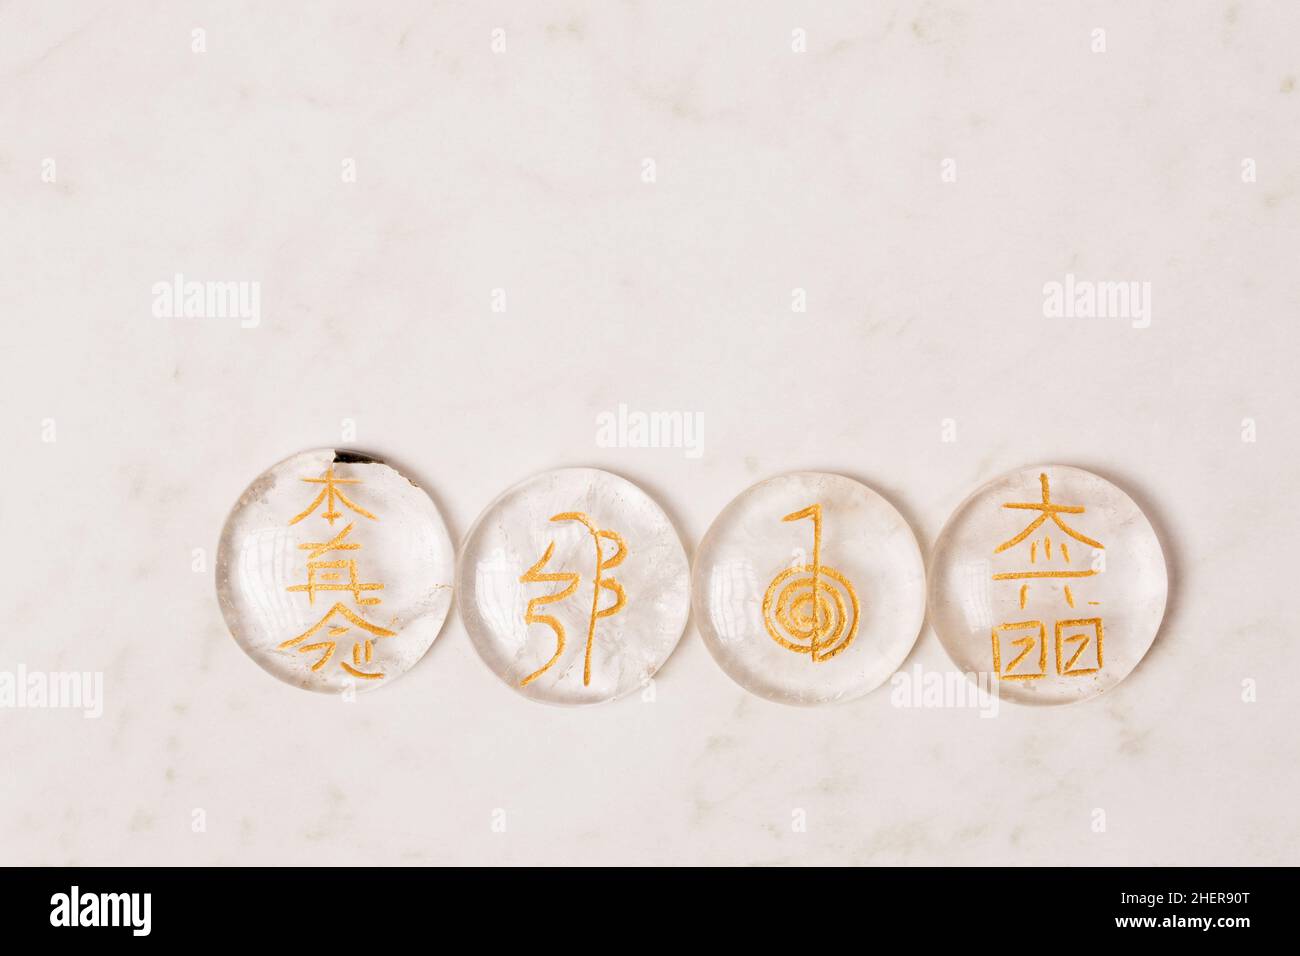 second level Reiki signs on rock crystal Stock Photo